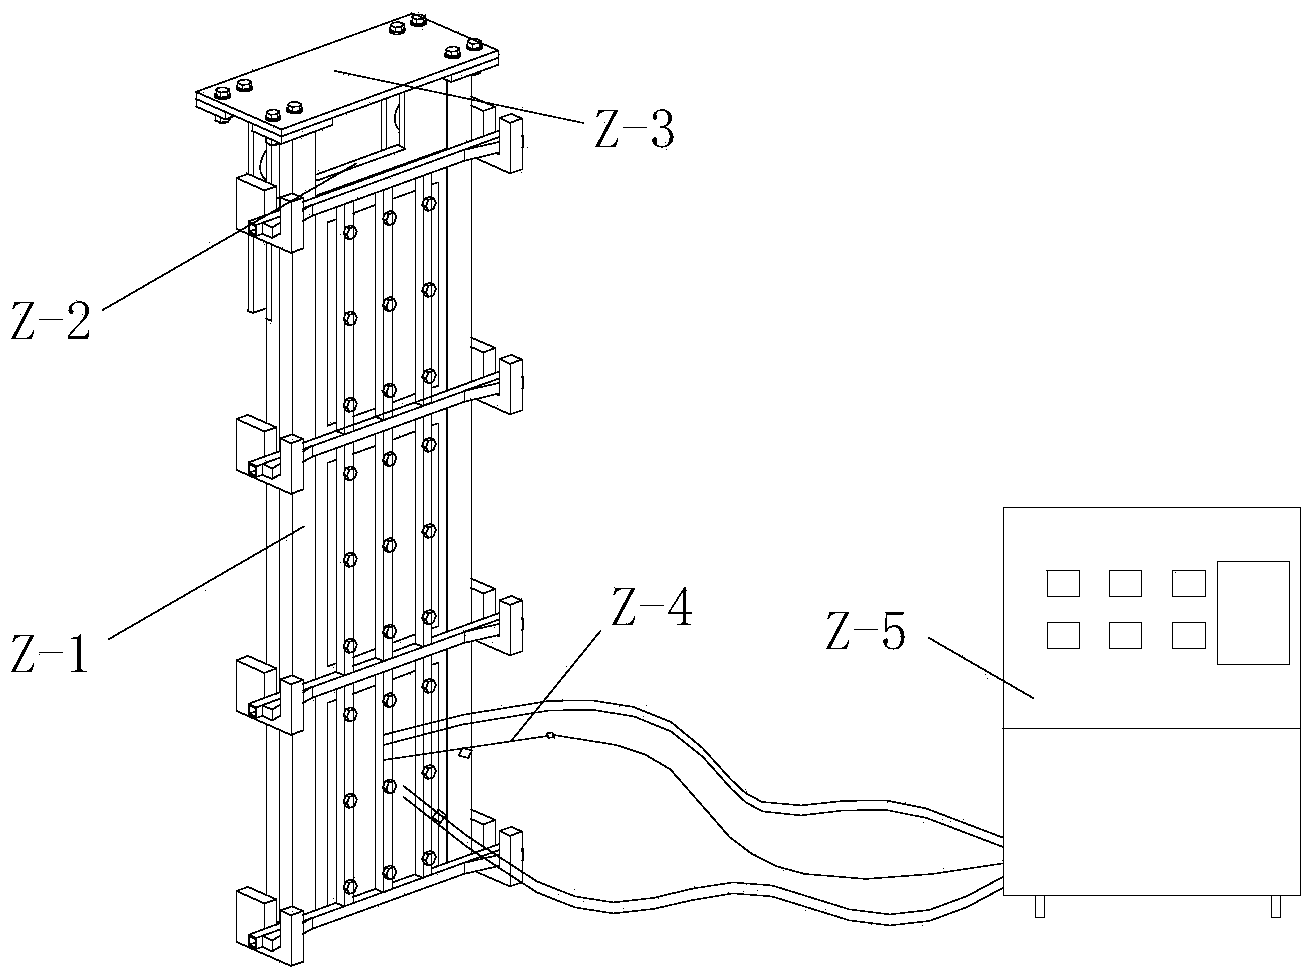 Automatic welding method of nuclear plant steel safety shell